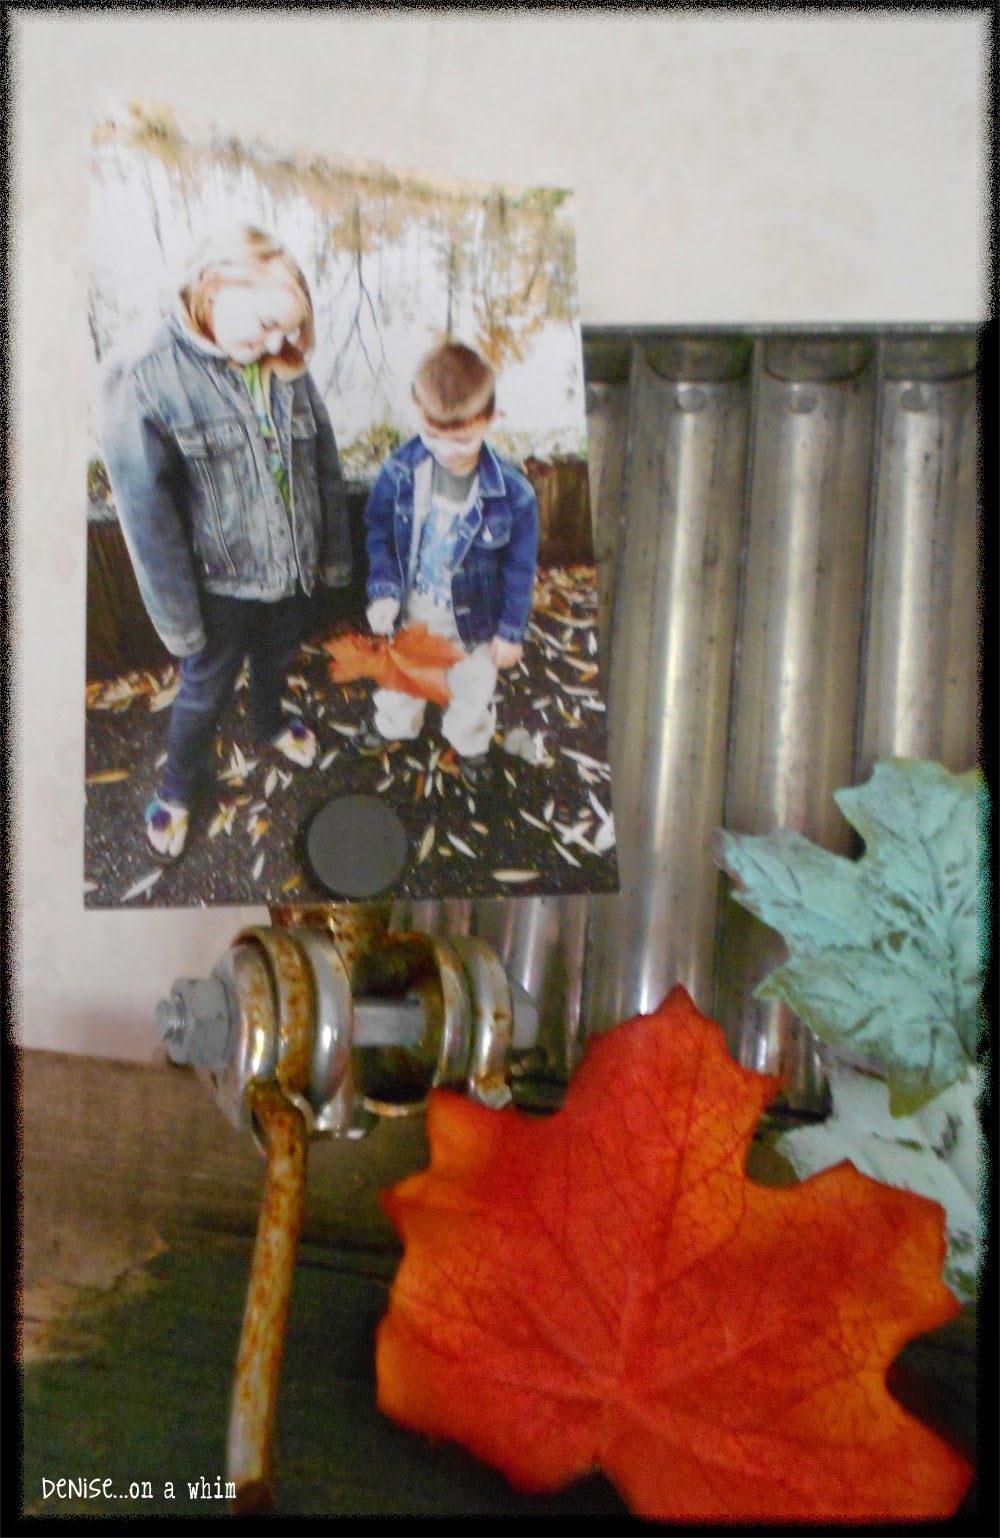 Displaying Family Photos in a Fall Vignette from Denise on a Whim